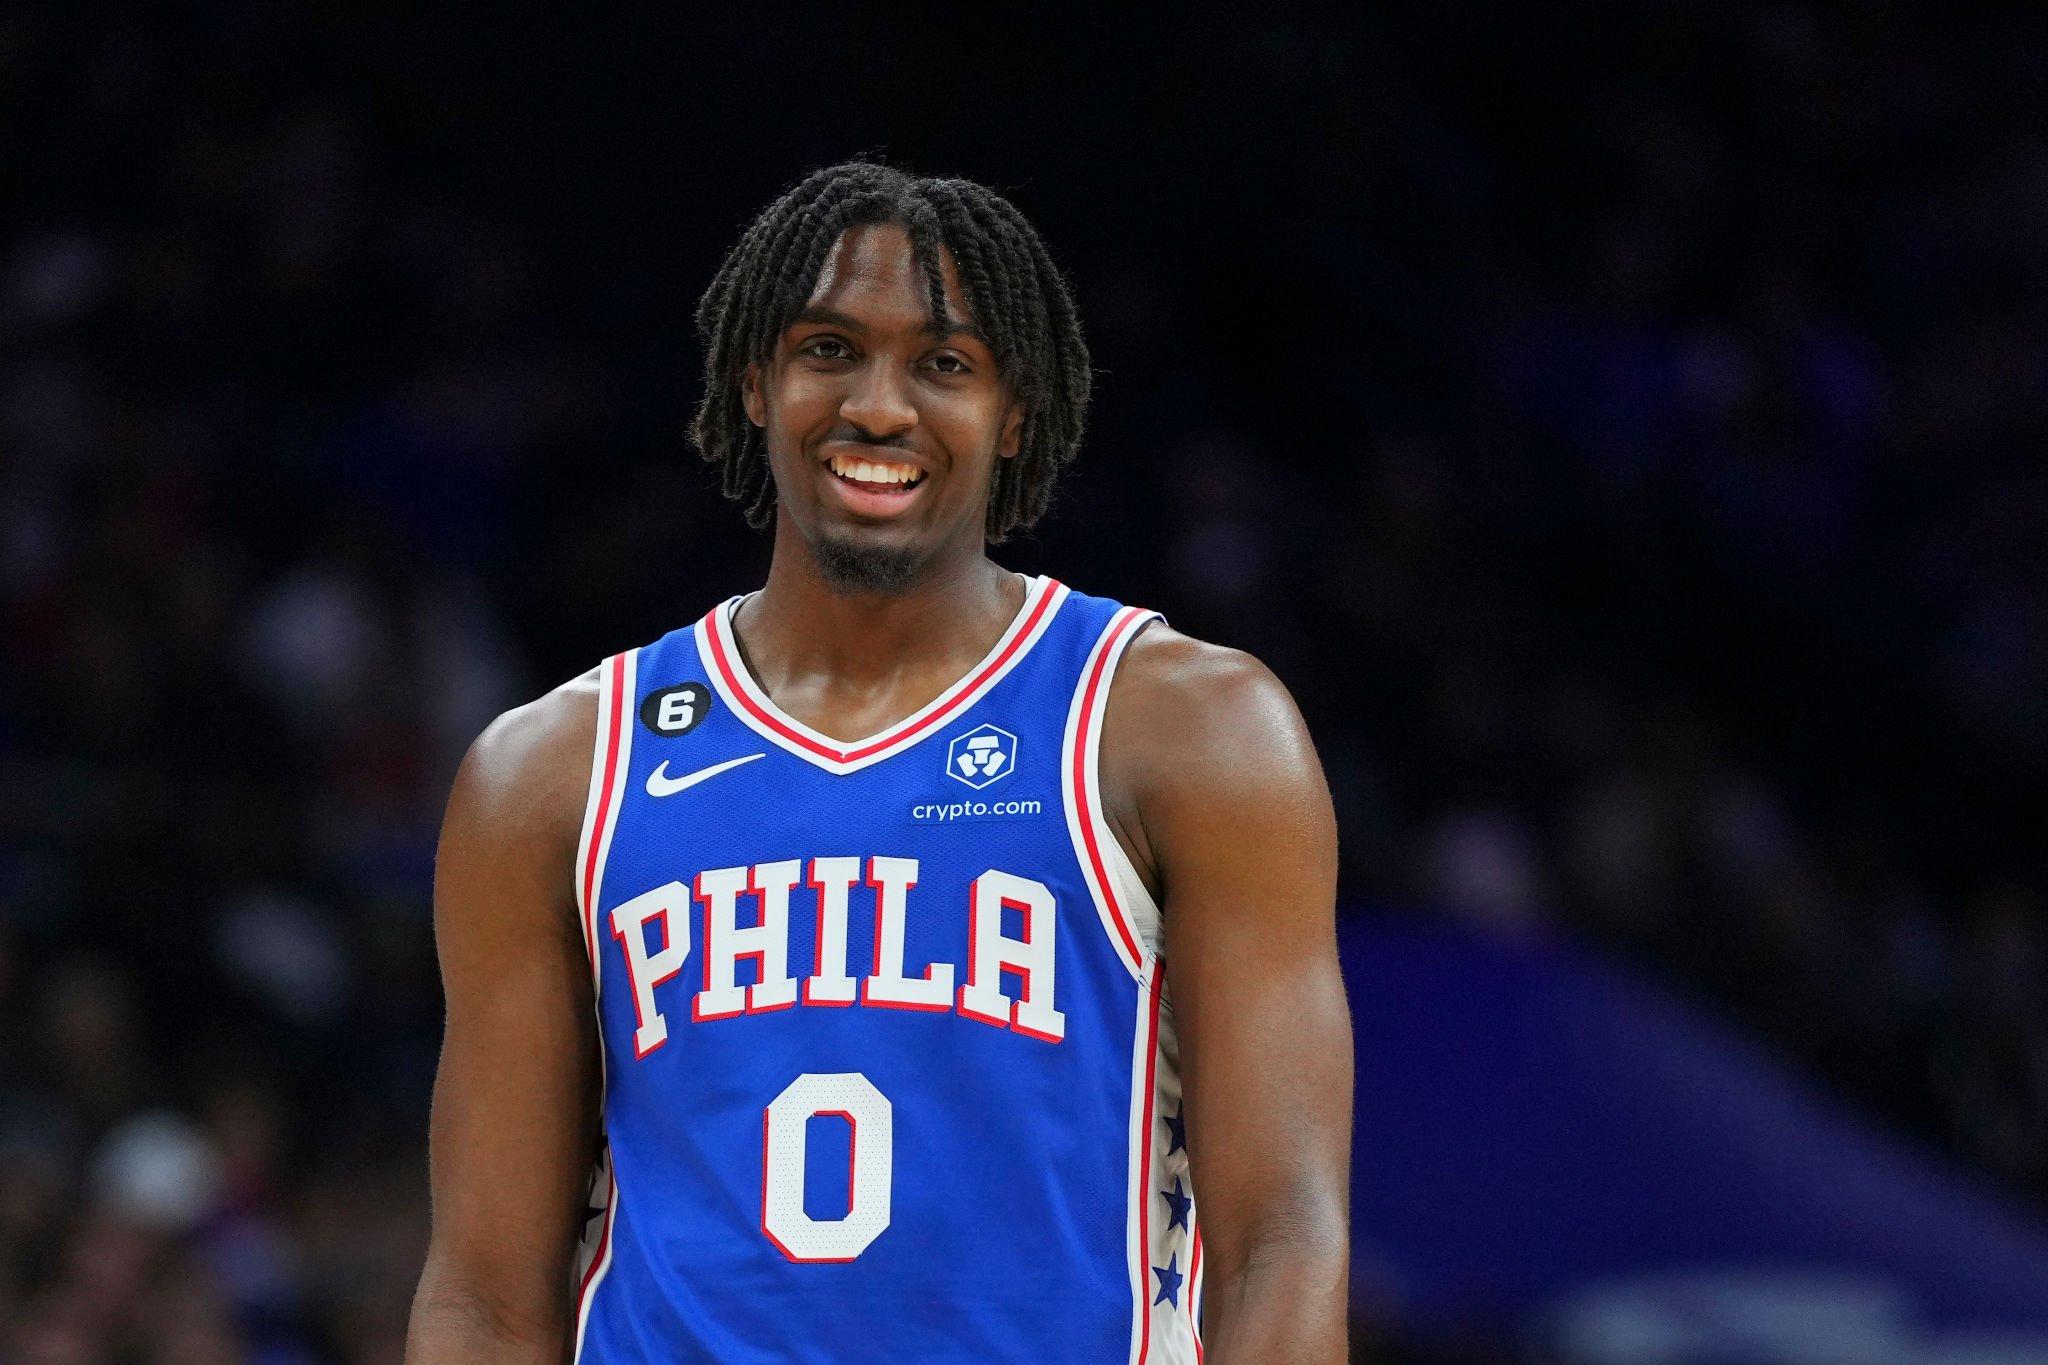 PHILADELPHIA, PA - JANUARY 04: Tyrese Maxey #0 of the Philadelphia 76ers smiles against the Indiana Pacers at the Wells Fargo Center on January 4, 2023 in Philadelphia, Pennsylvania. NOTE TO USER: User expressly acknowledges and agrees that, by downloading and or using this photograph, User is consenting to the terms and conditions of the Getty Images License Agreement. (Photo by Mitchell Leff/Getty Images)